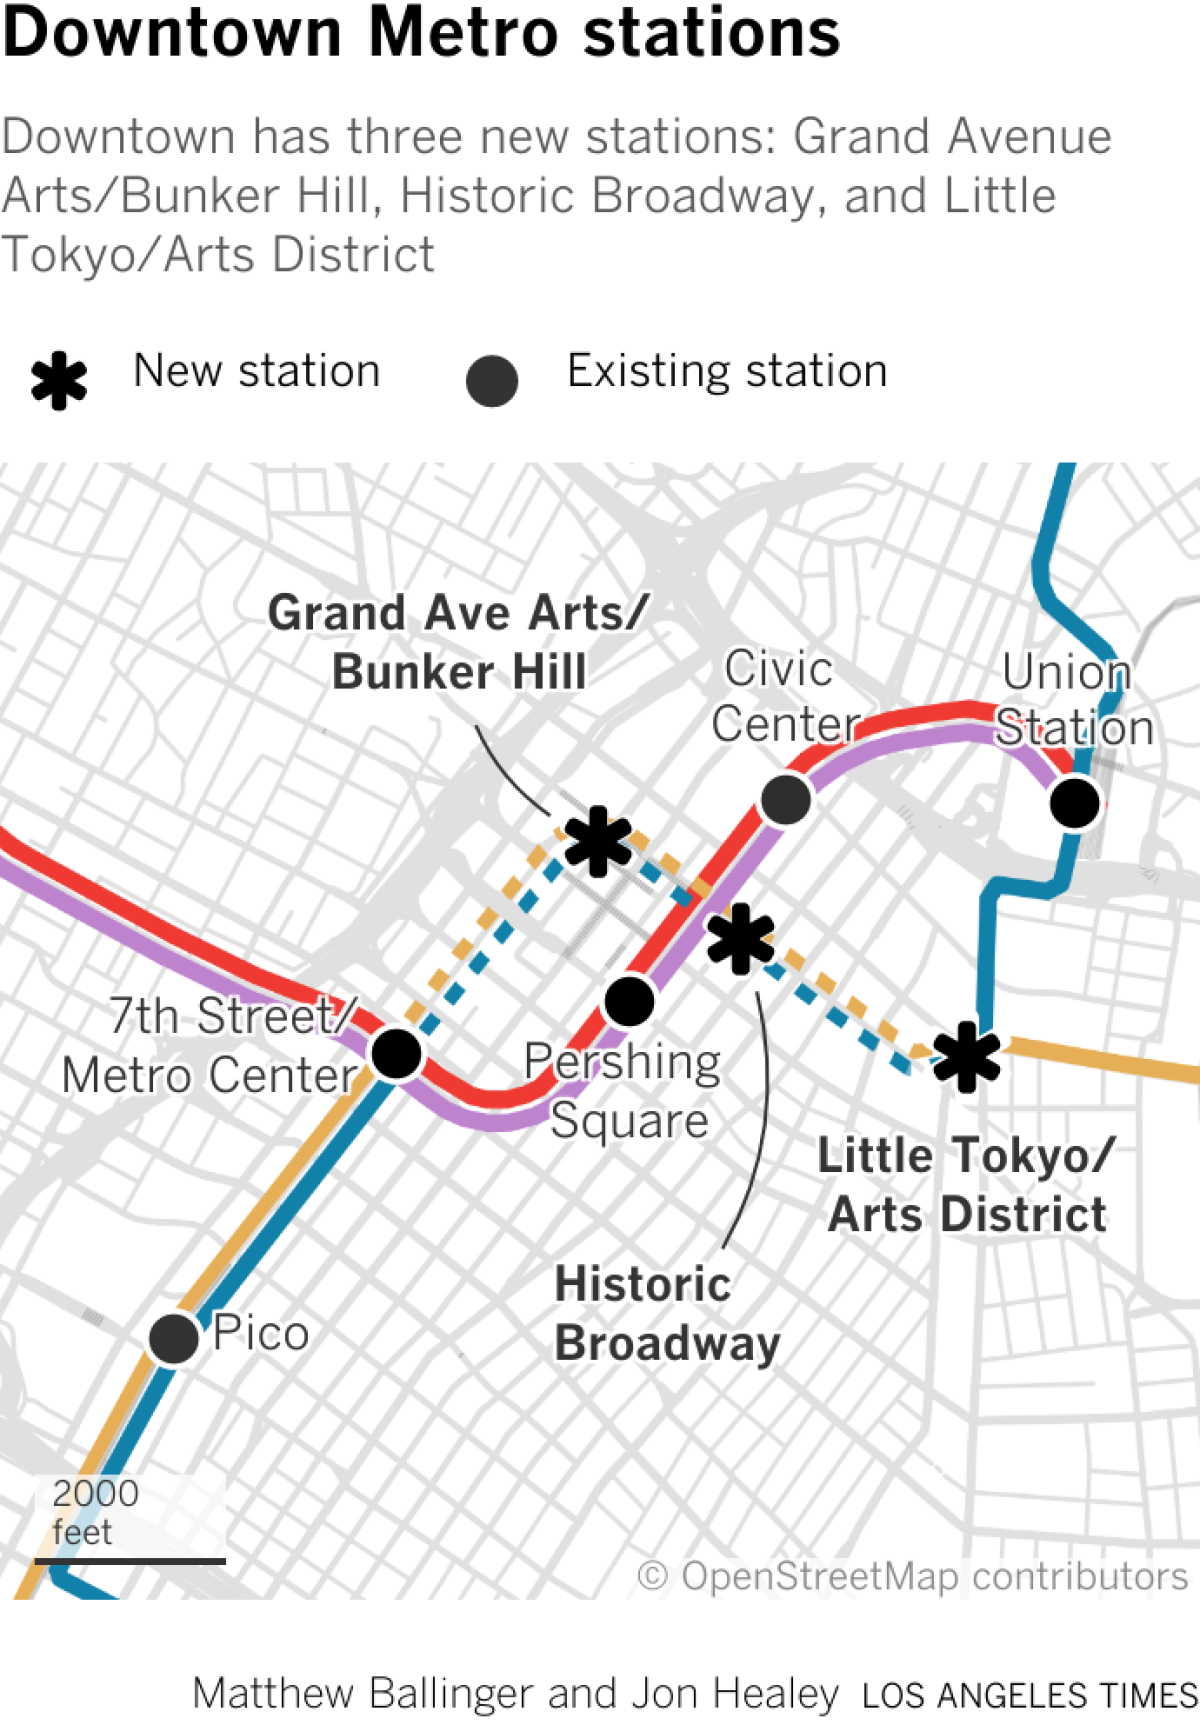 Map locates seven downtown Metro rail stations, including the three new ones.